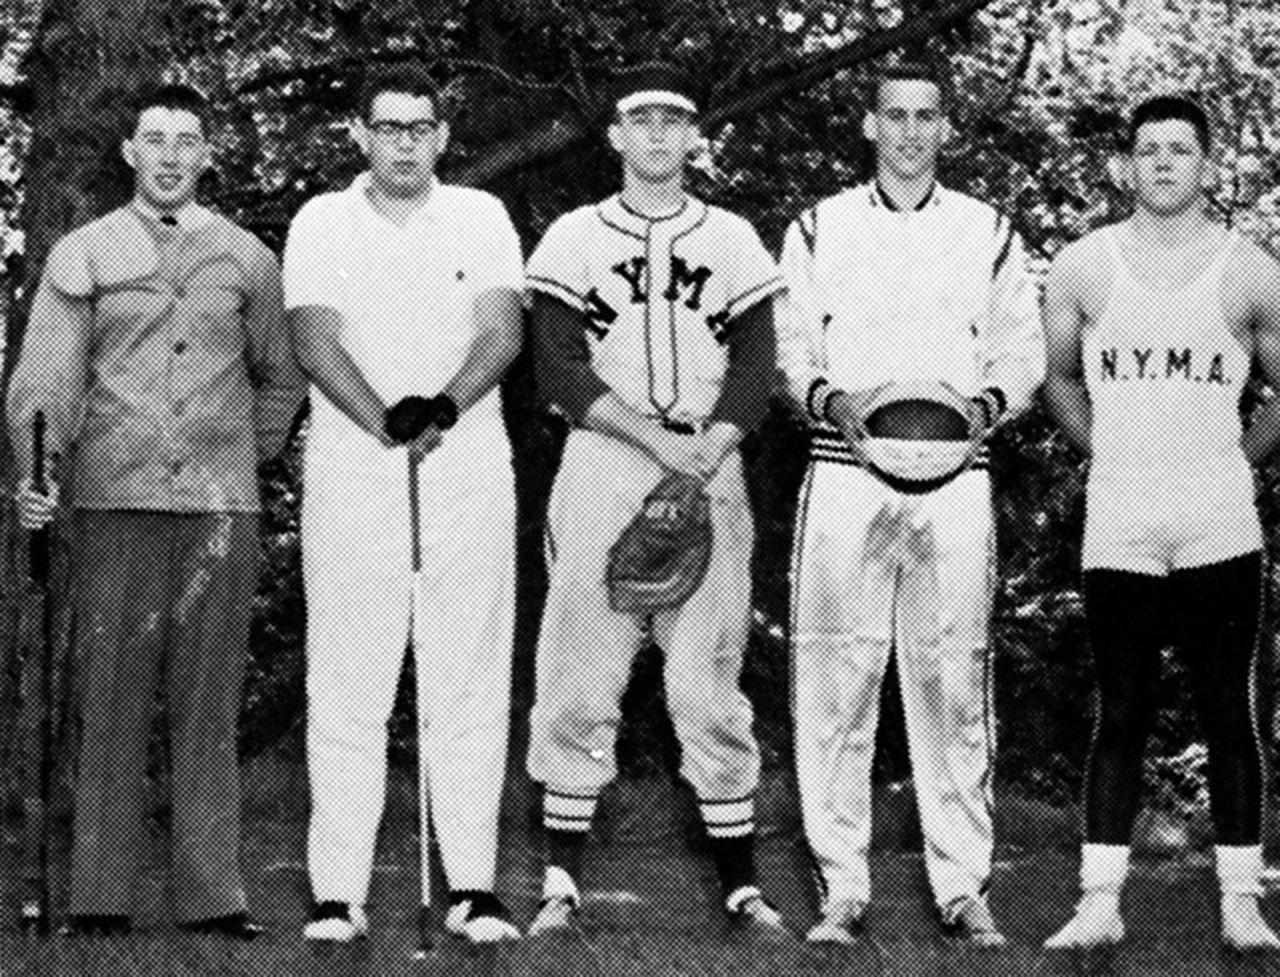 Trump, center, wears a baseball uniform at the New York Military Academy. After he graduated from the boarding school, he went to college. He started at Fordham University before transferring and later graduating from the Wharton School, the University of Pennsylvania's business school.